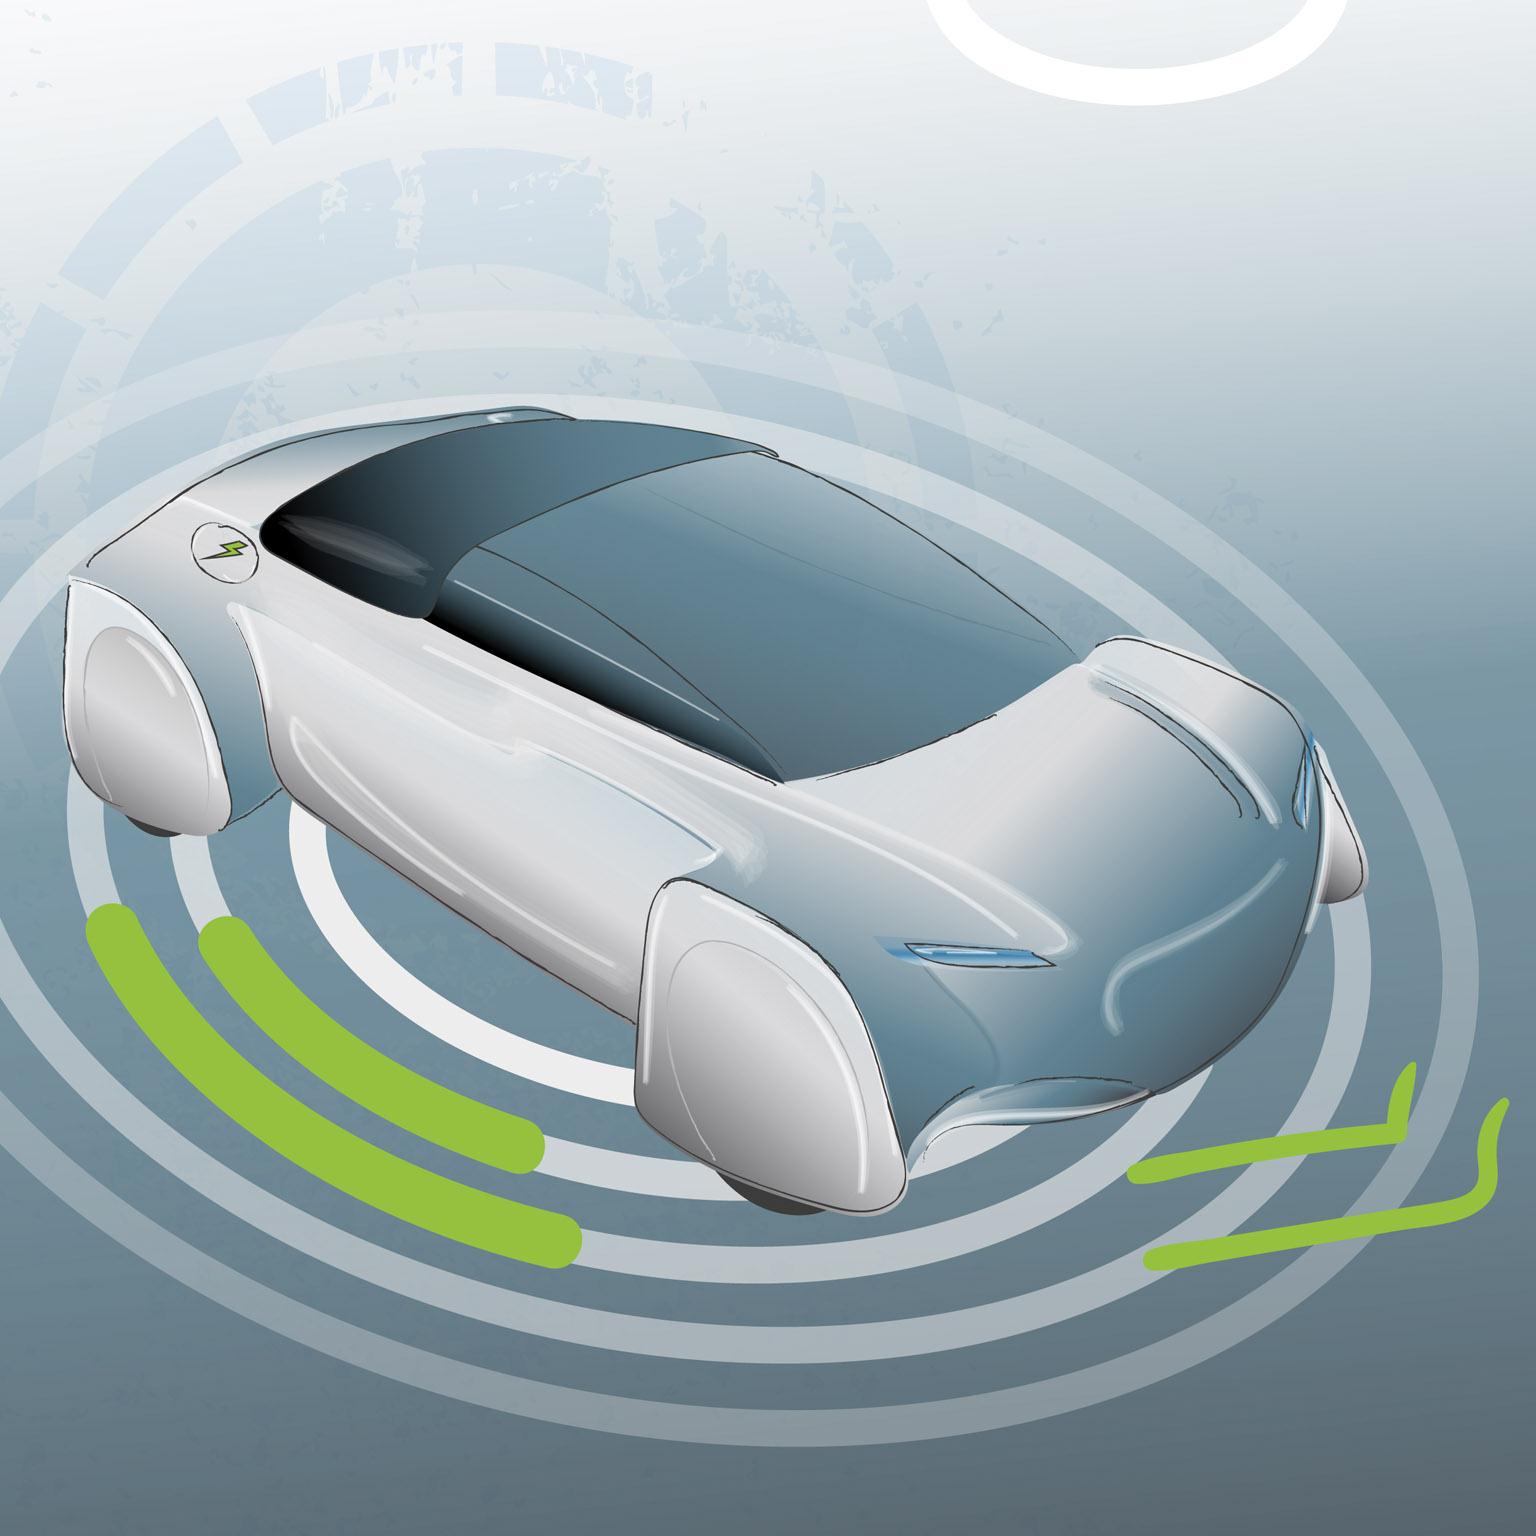 the future of the automotive industry - Factors shaping the future of the automotive industry